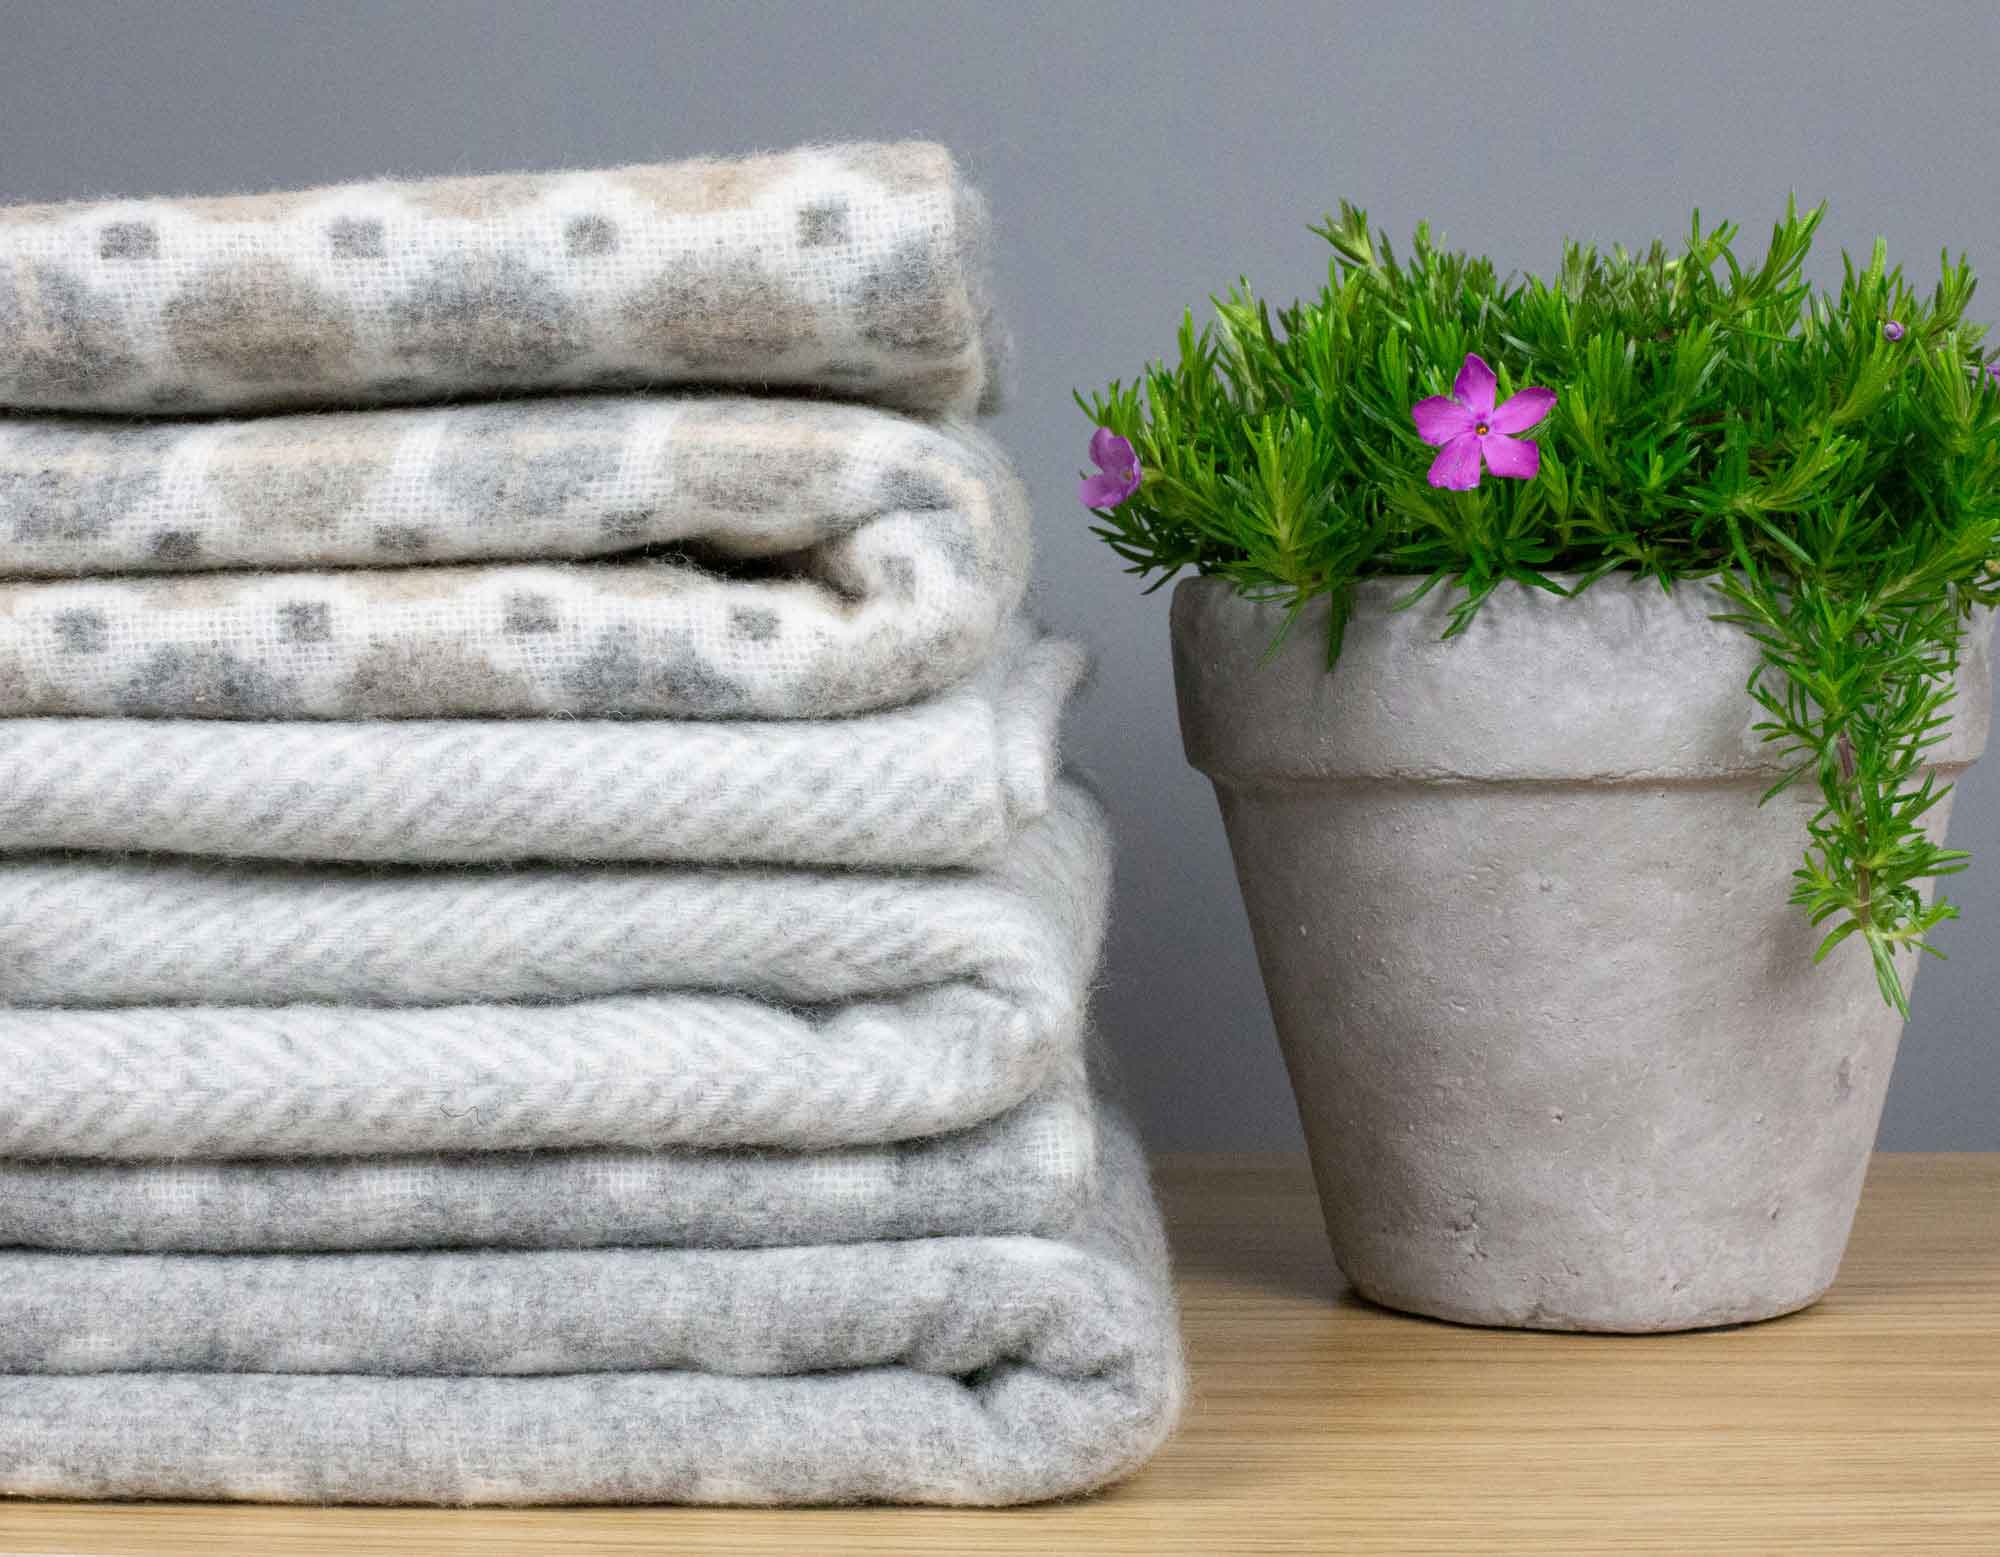 Pile of grey merino wool throws next to plant in a pot